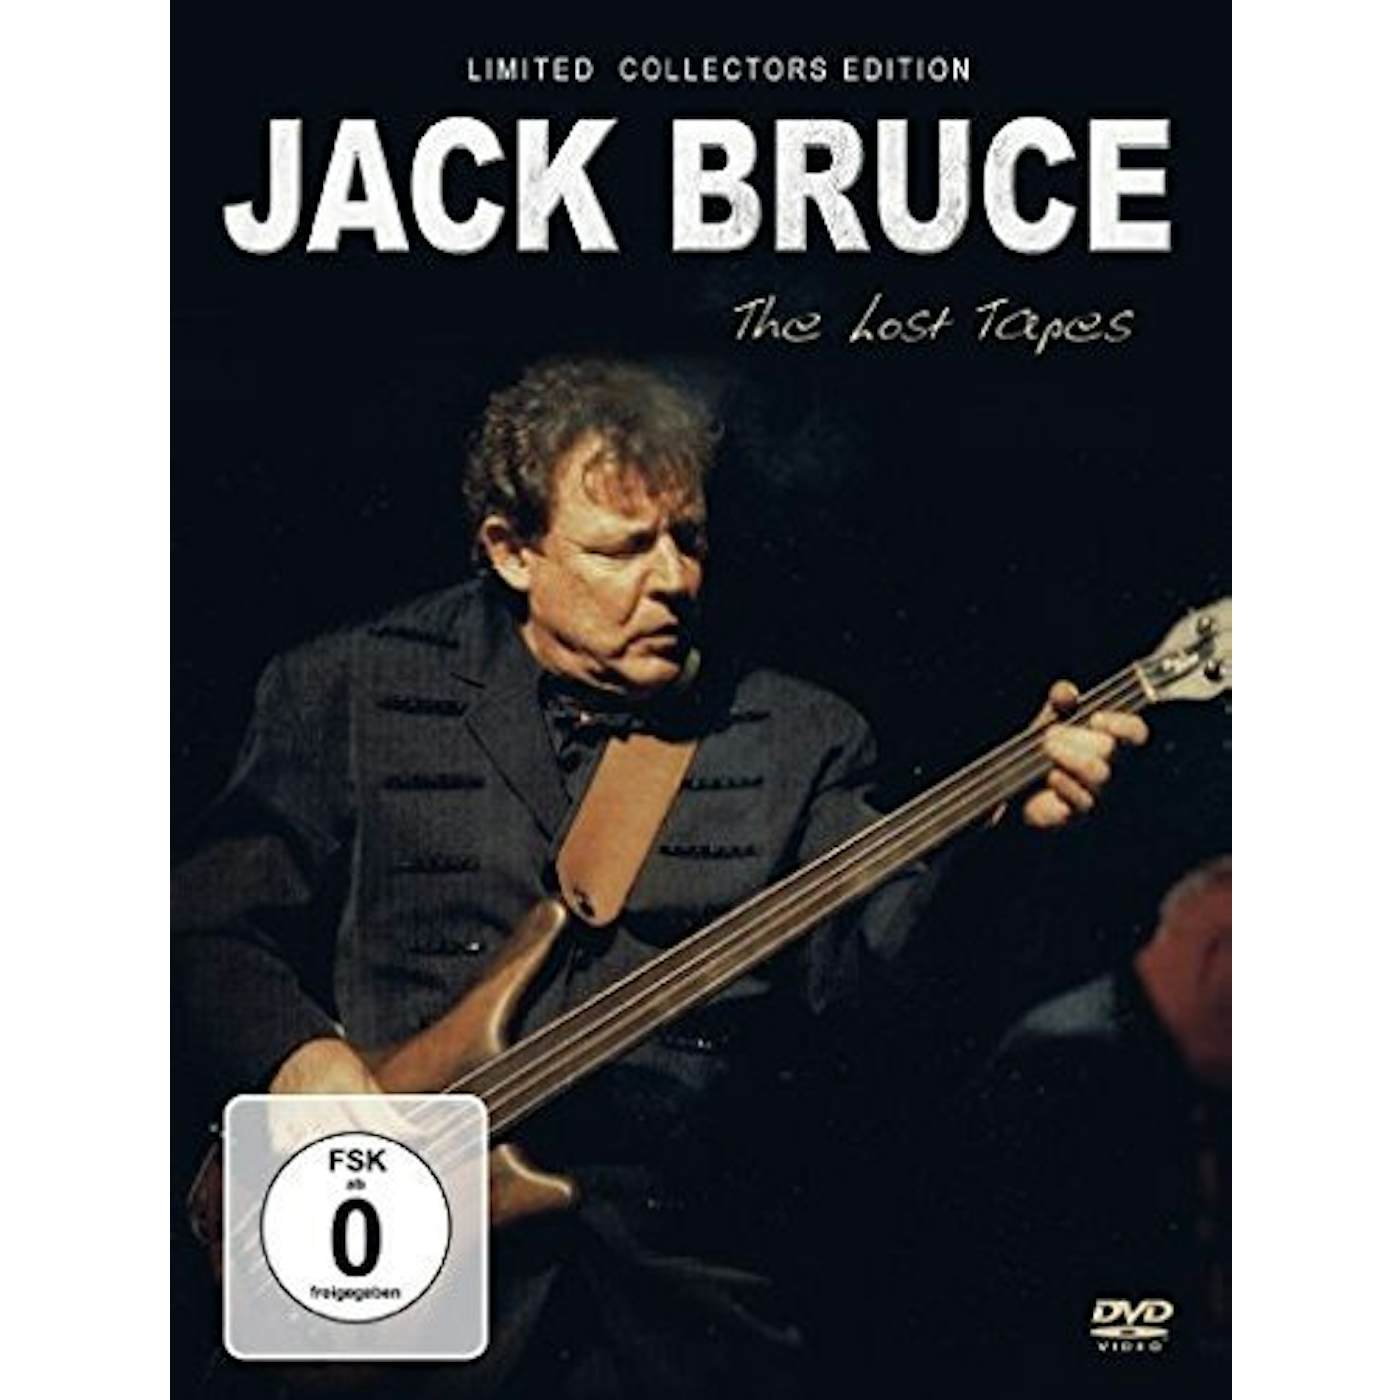 Jack Bruce LOST TAPES DVD